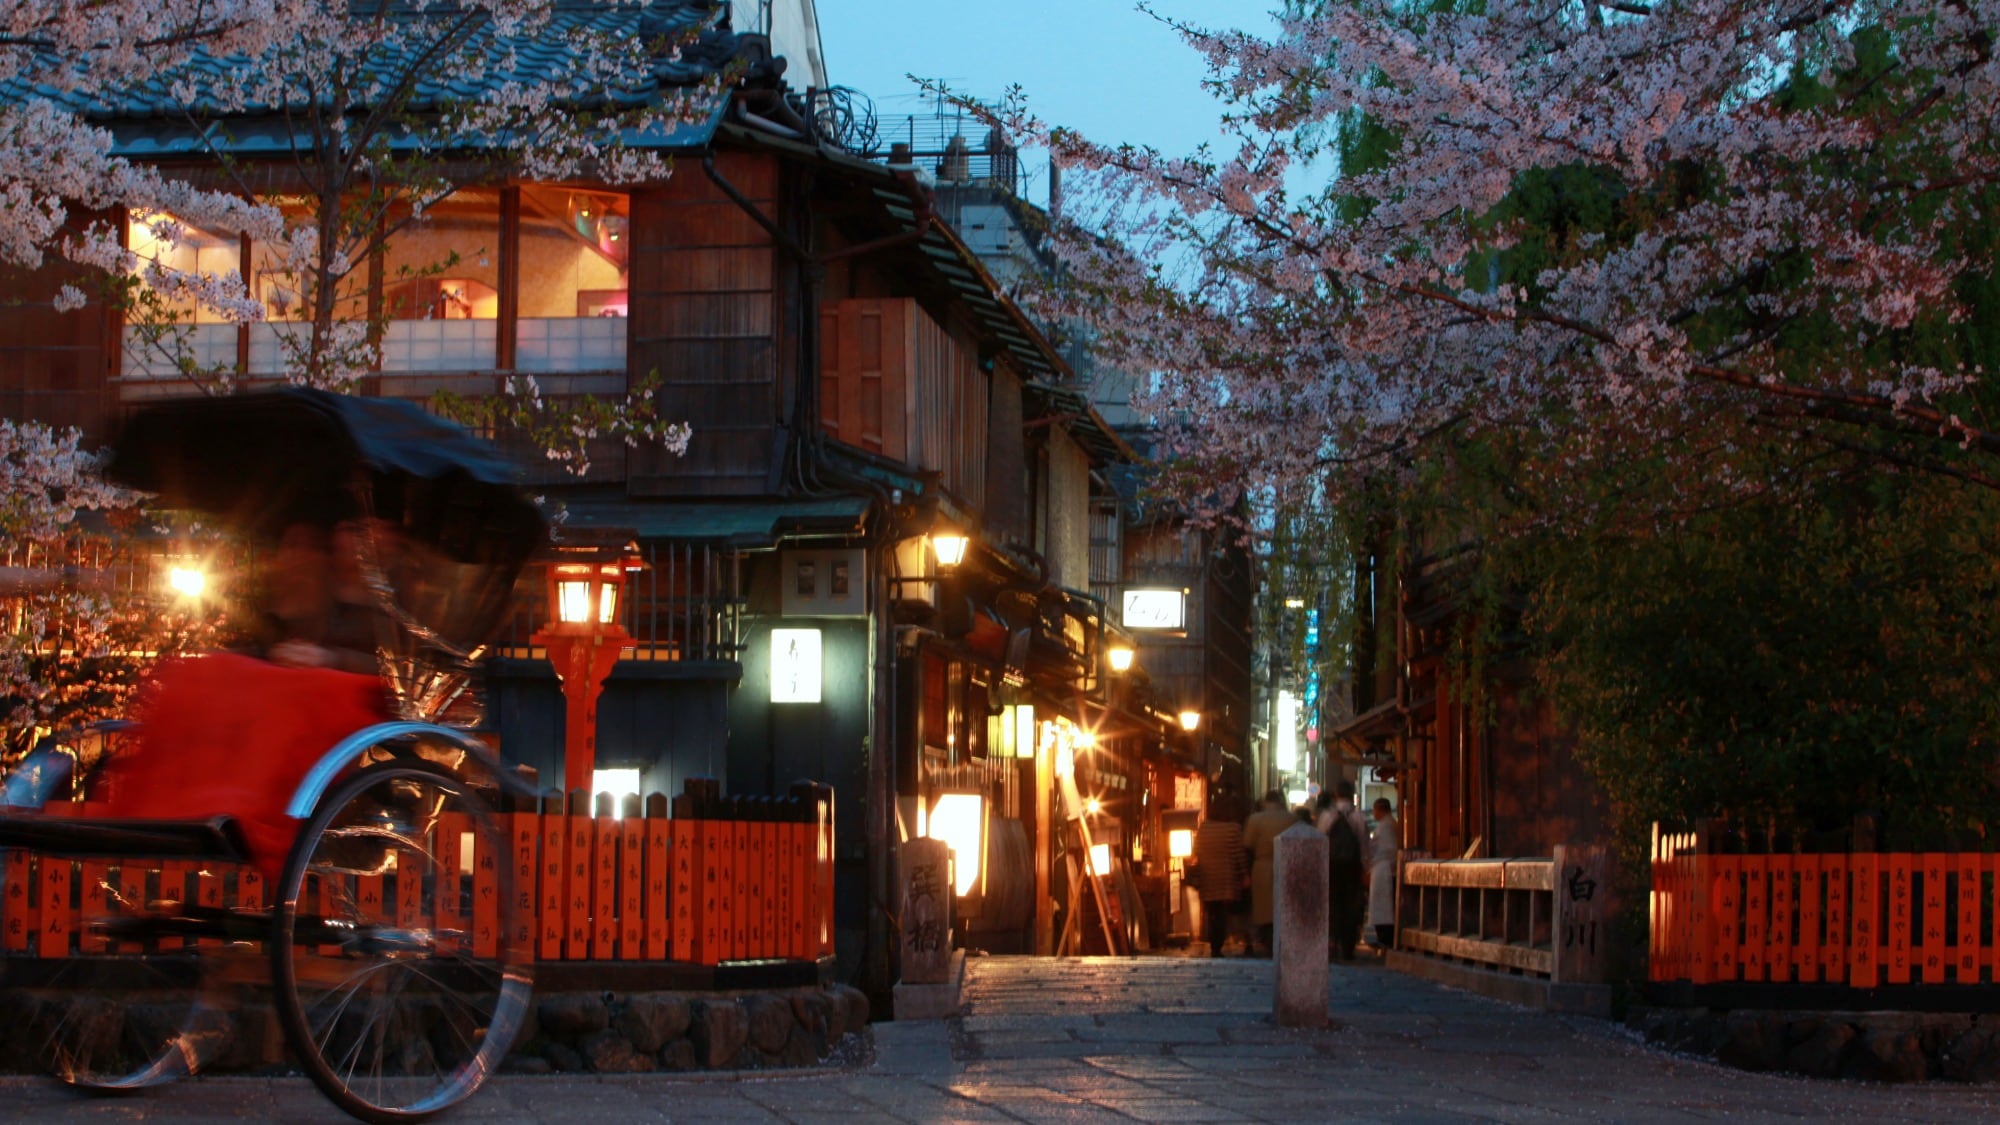 The hotel is located in the center of Gion. Perfect as a base for sightseeing!